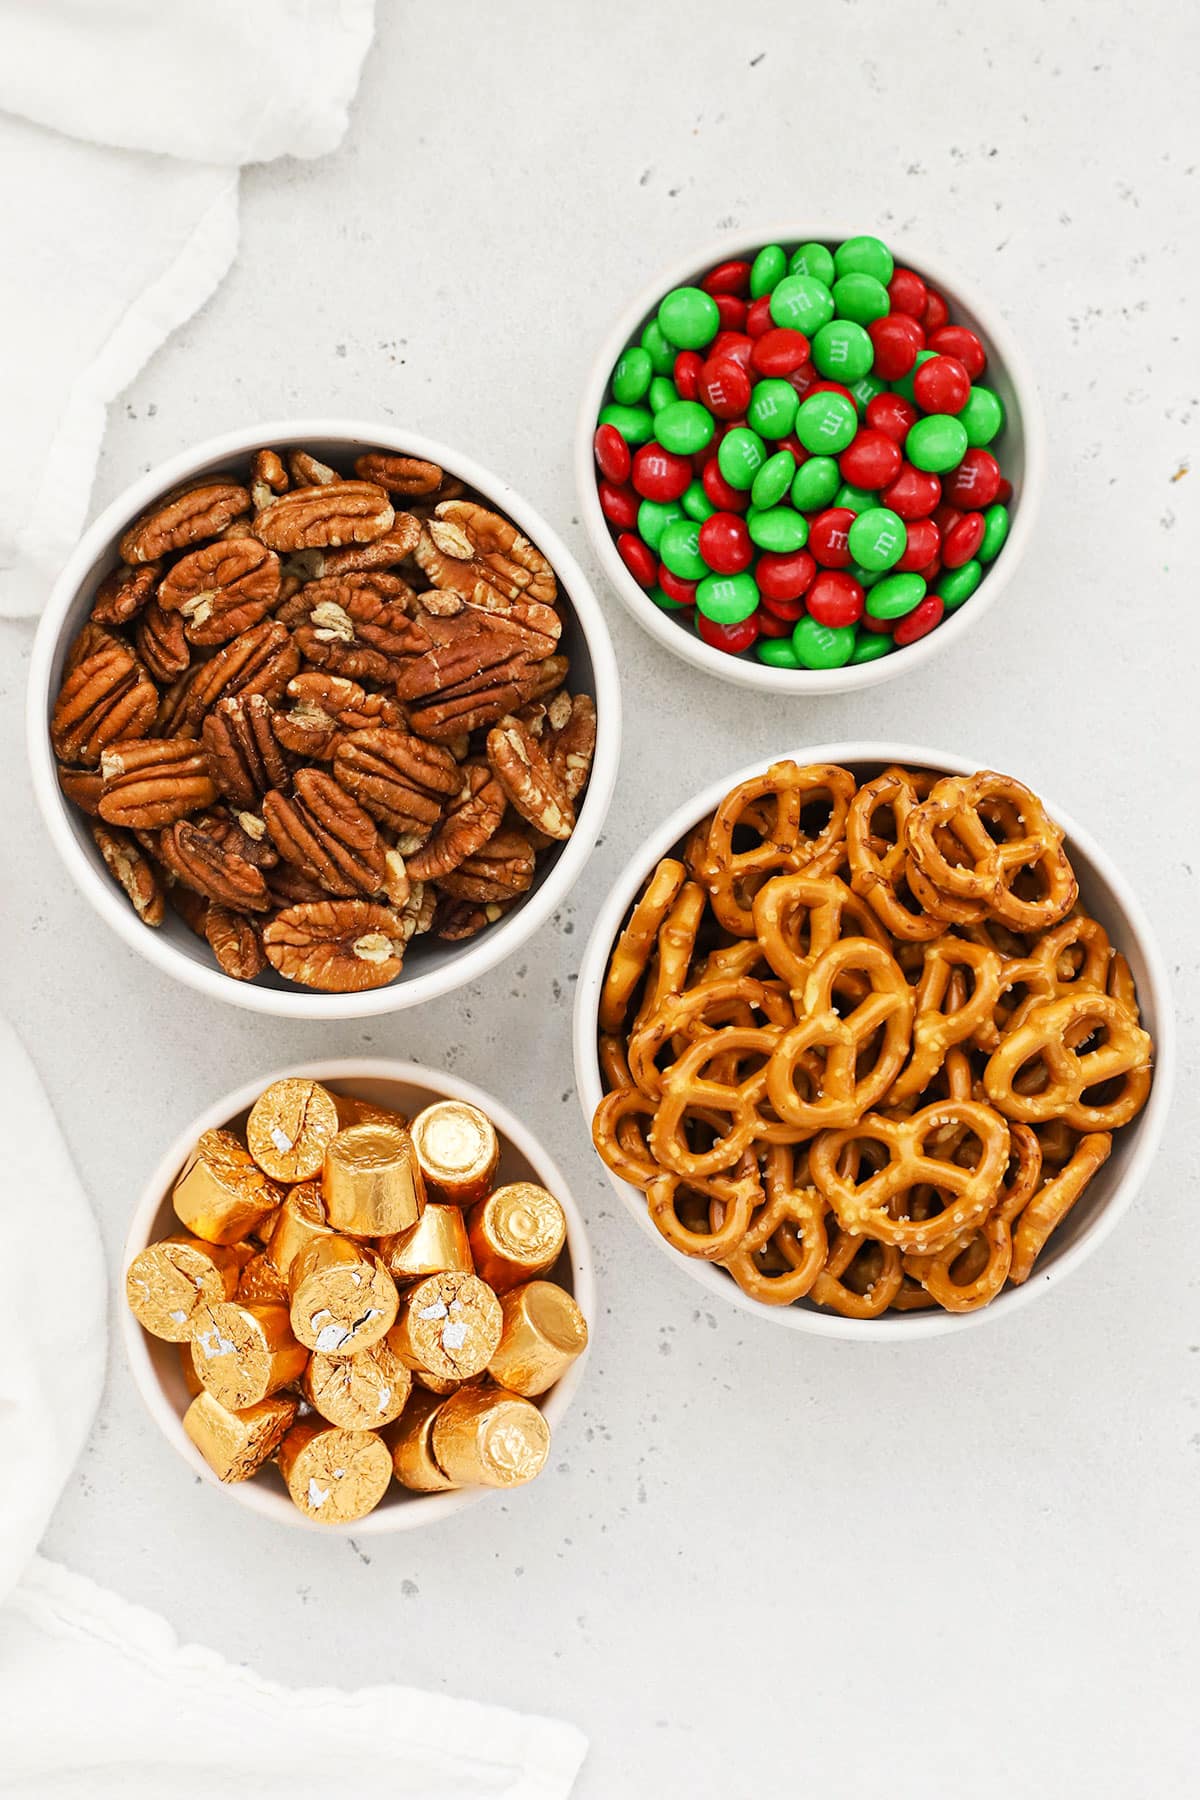 ingredients for gluten-free Rolo pretzels with m&ms or pecans